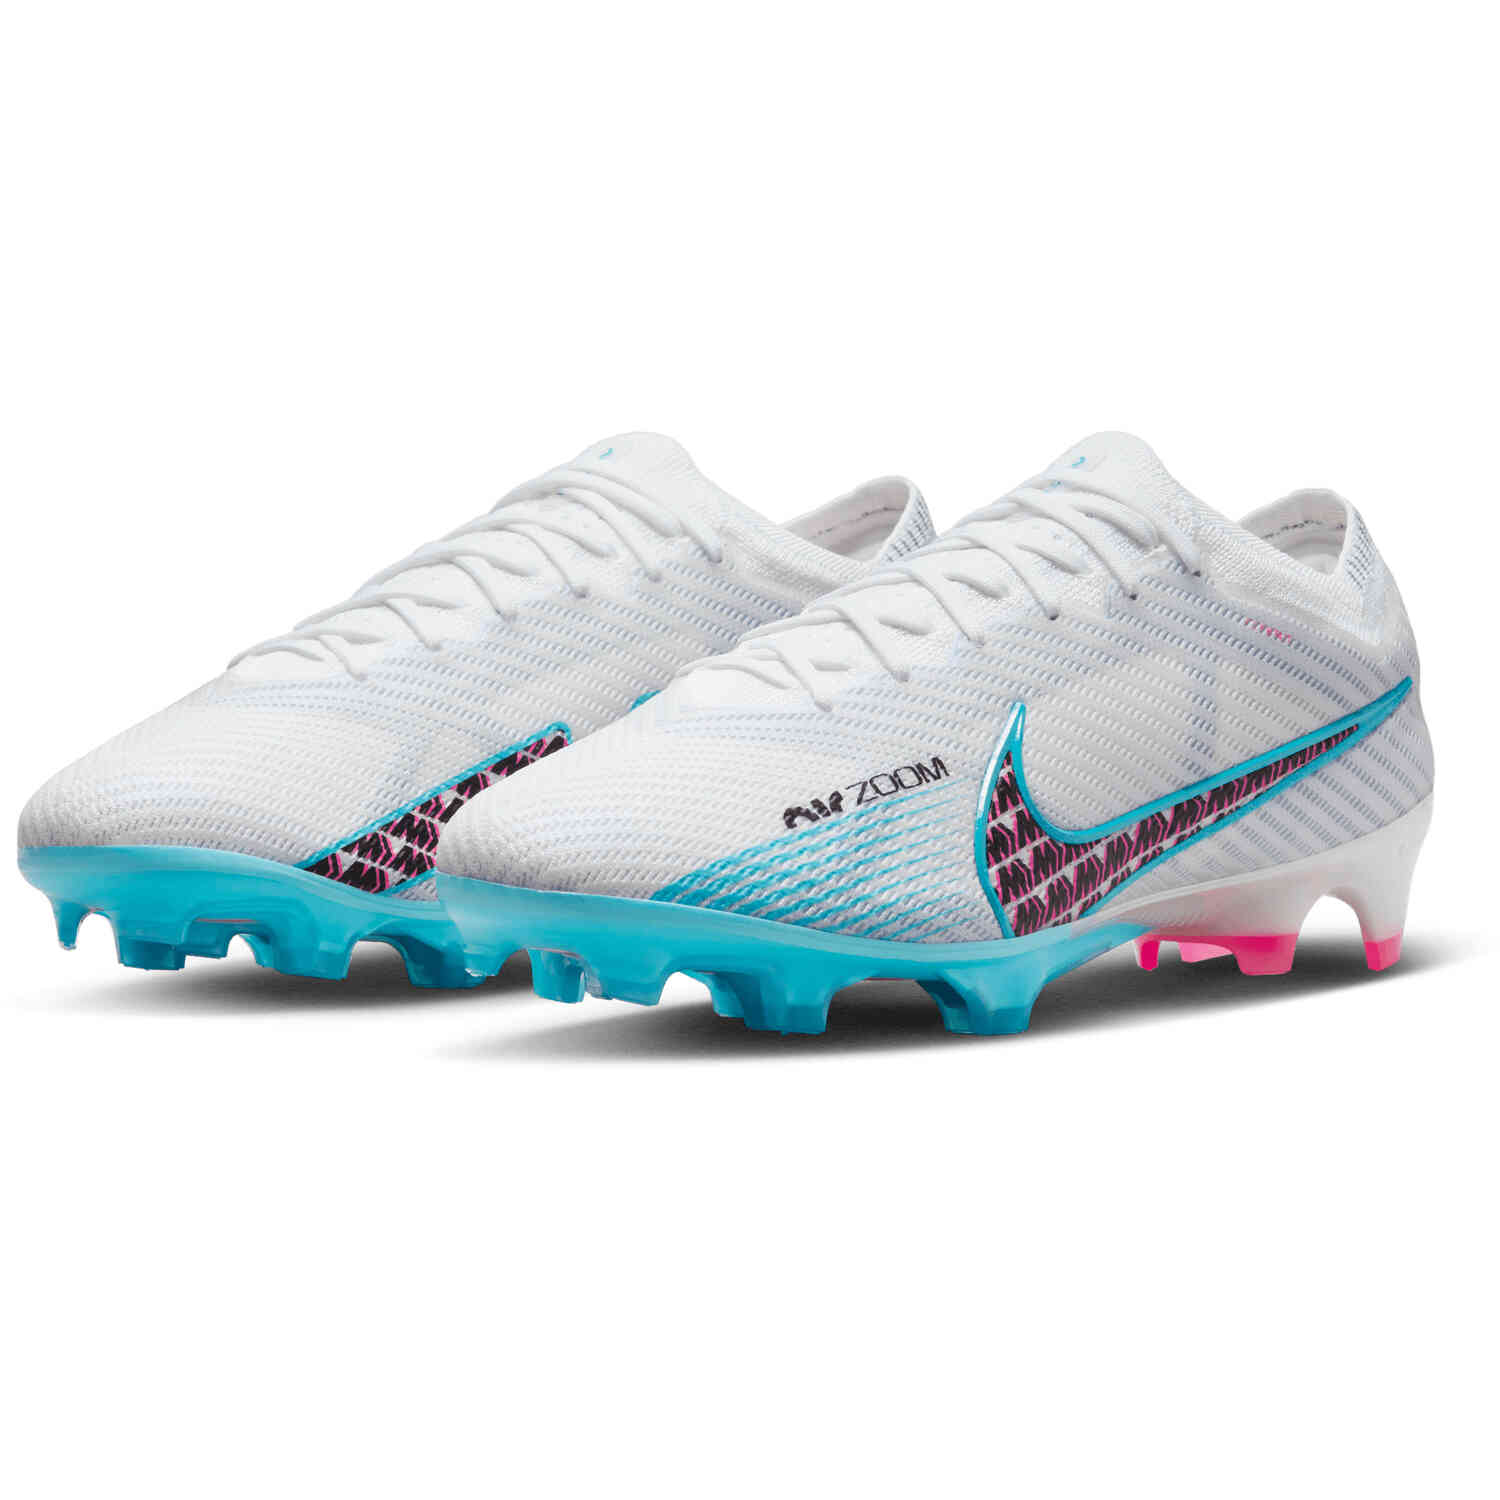 Score On The Field With Nike Pink And White Soccer Cleats - Shoe Effect